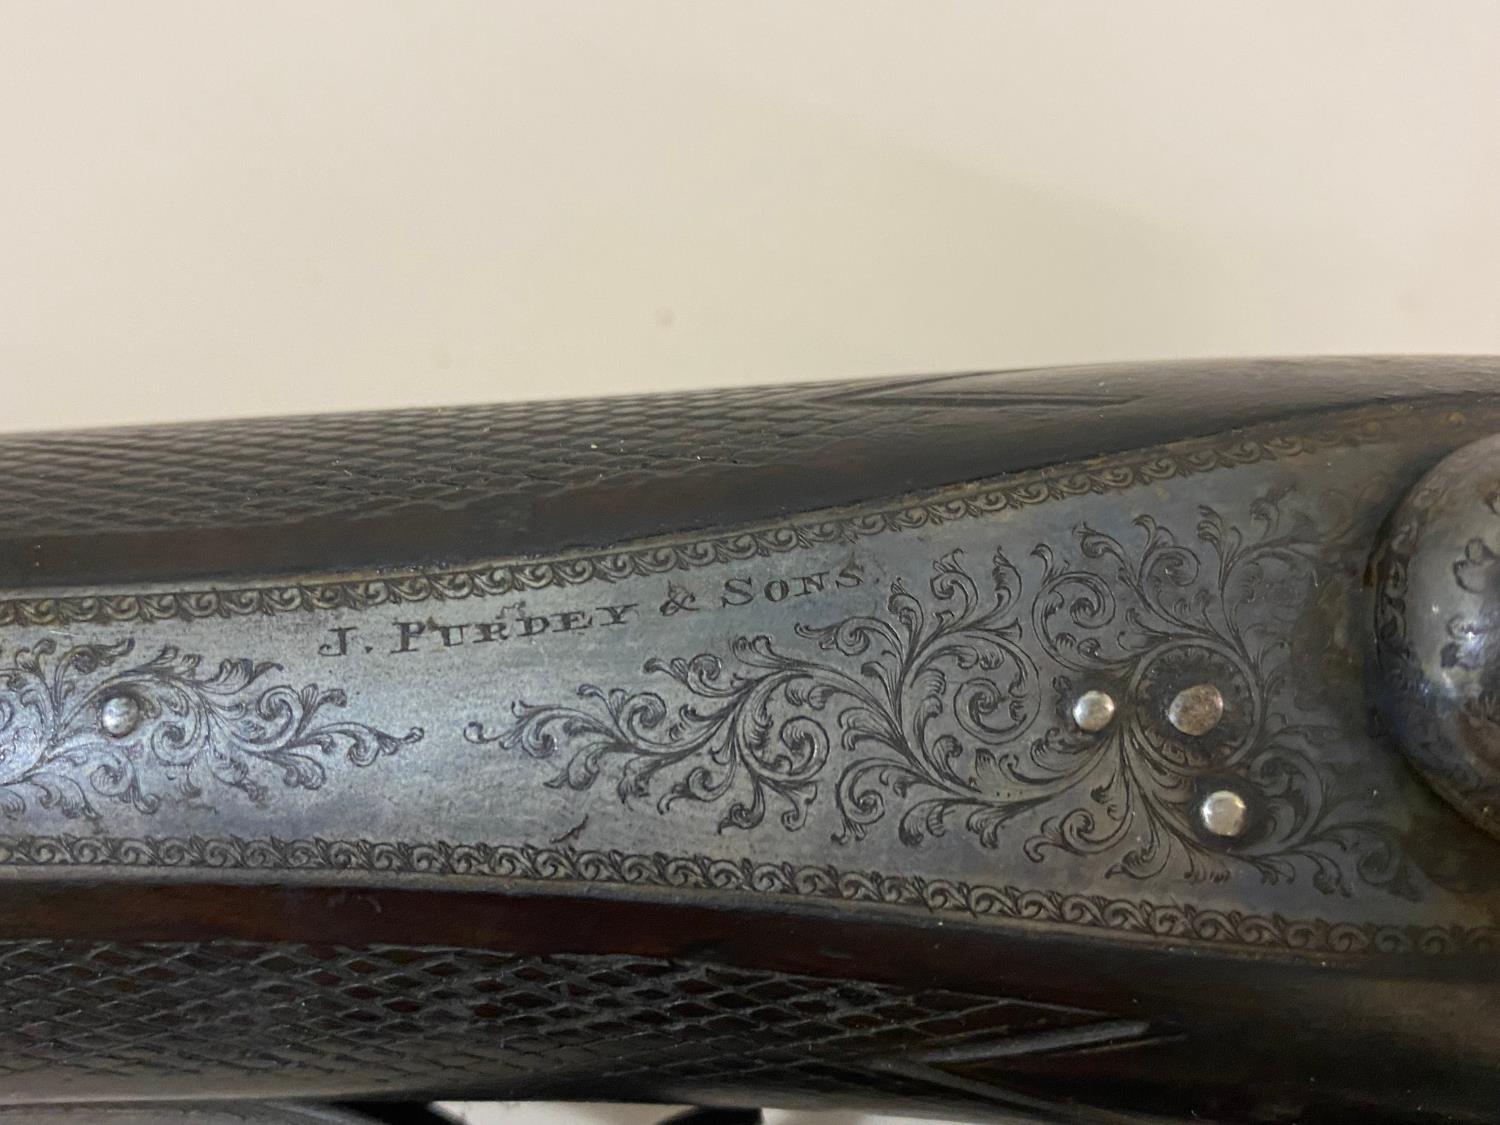 A FINE VICTORIAN SPORTING GUN BY PURDEY OF LONDON. - Image 11 of 11